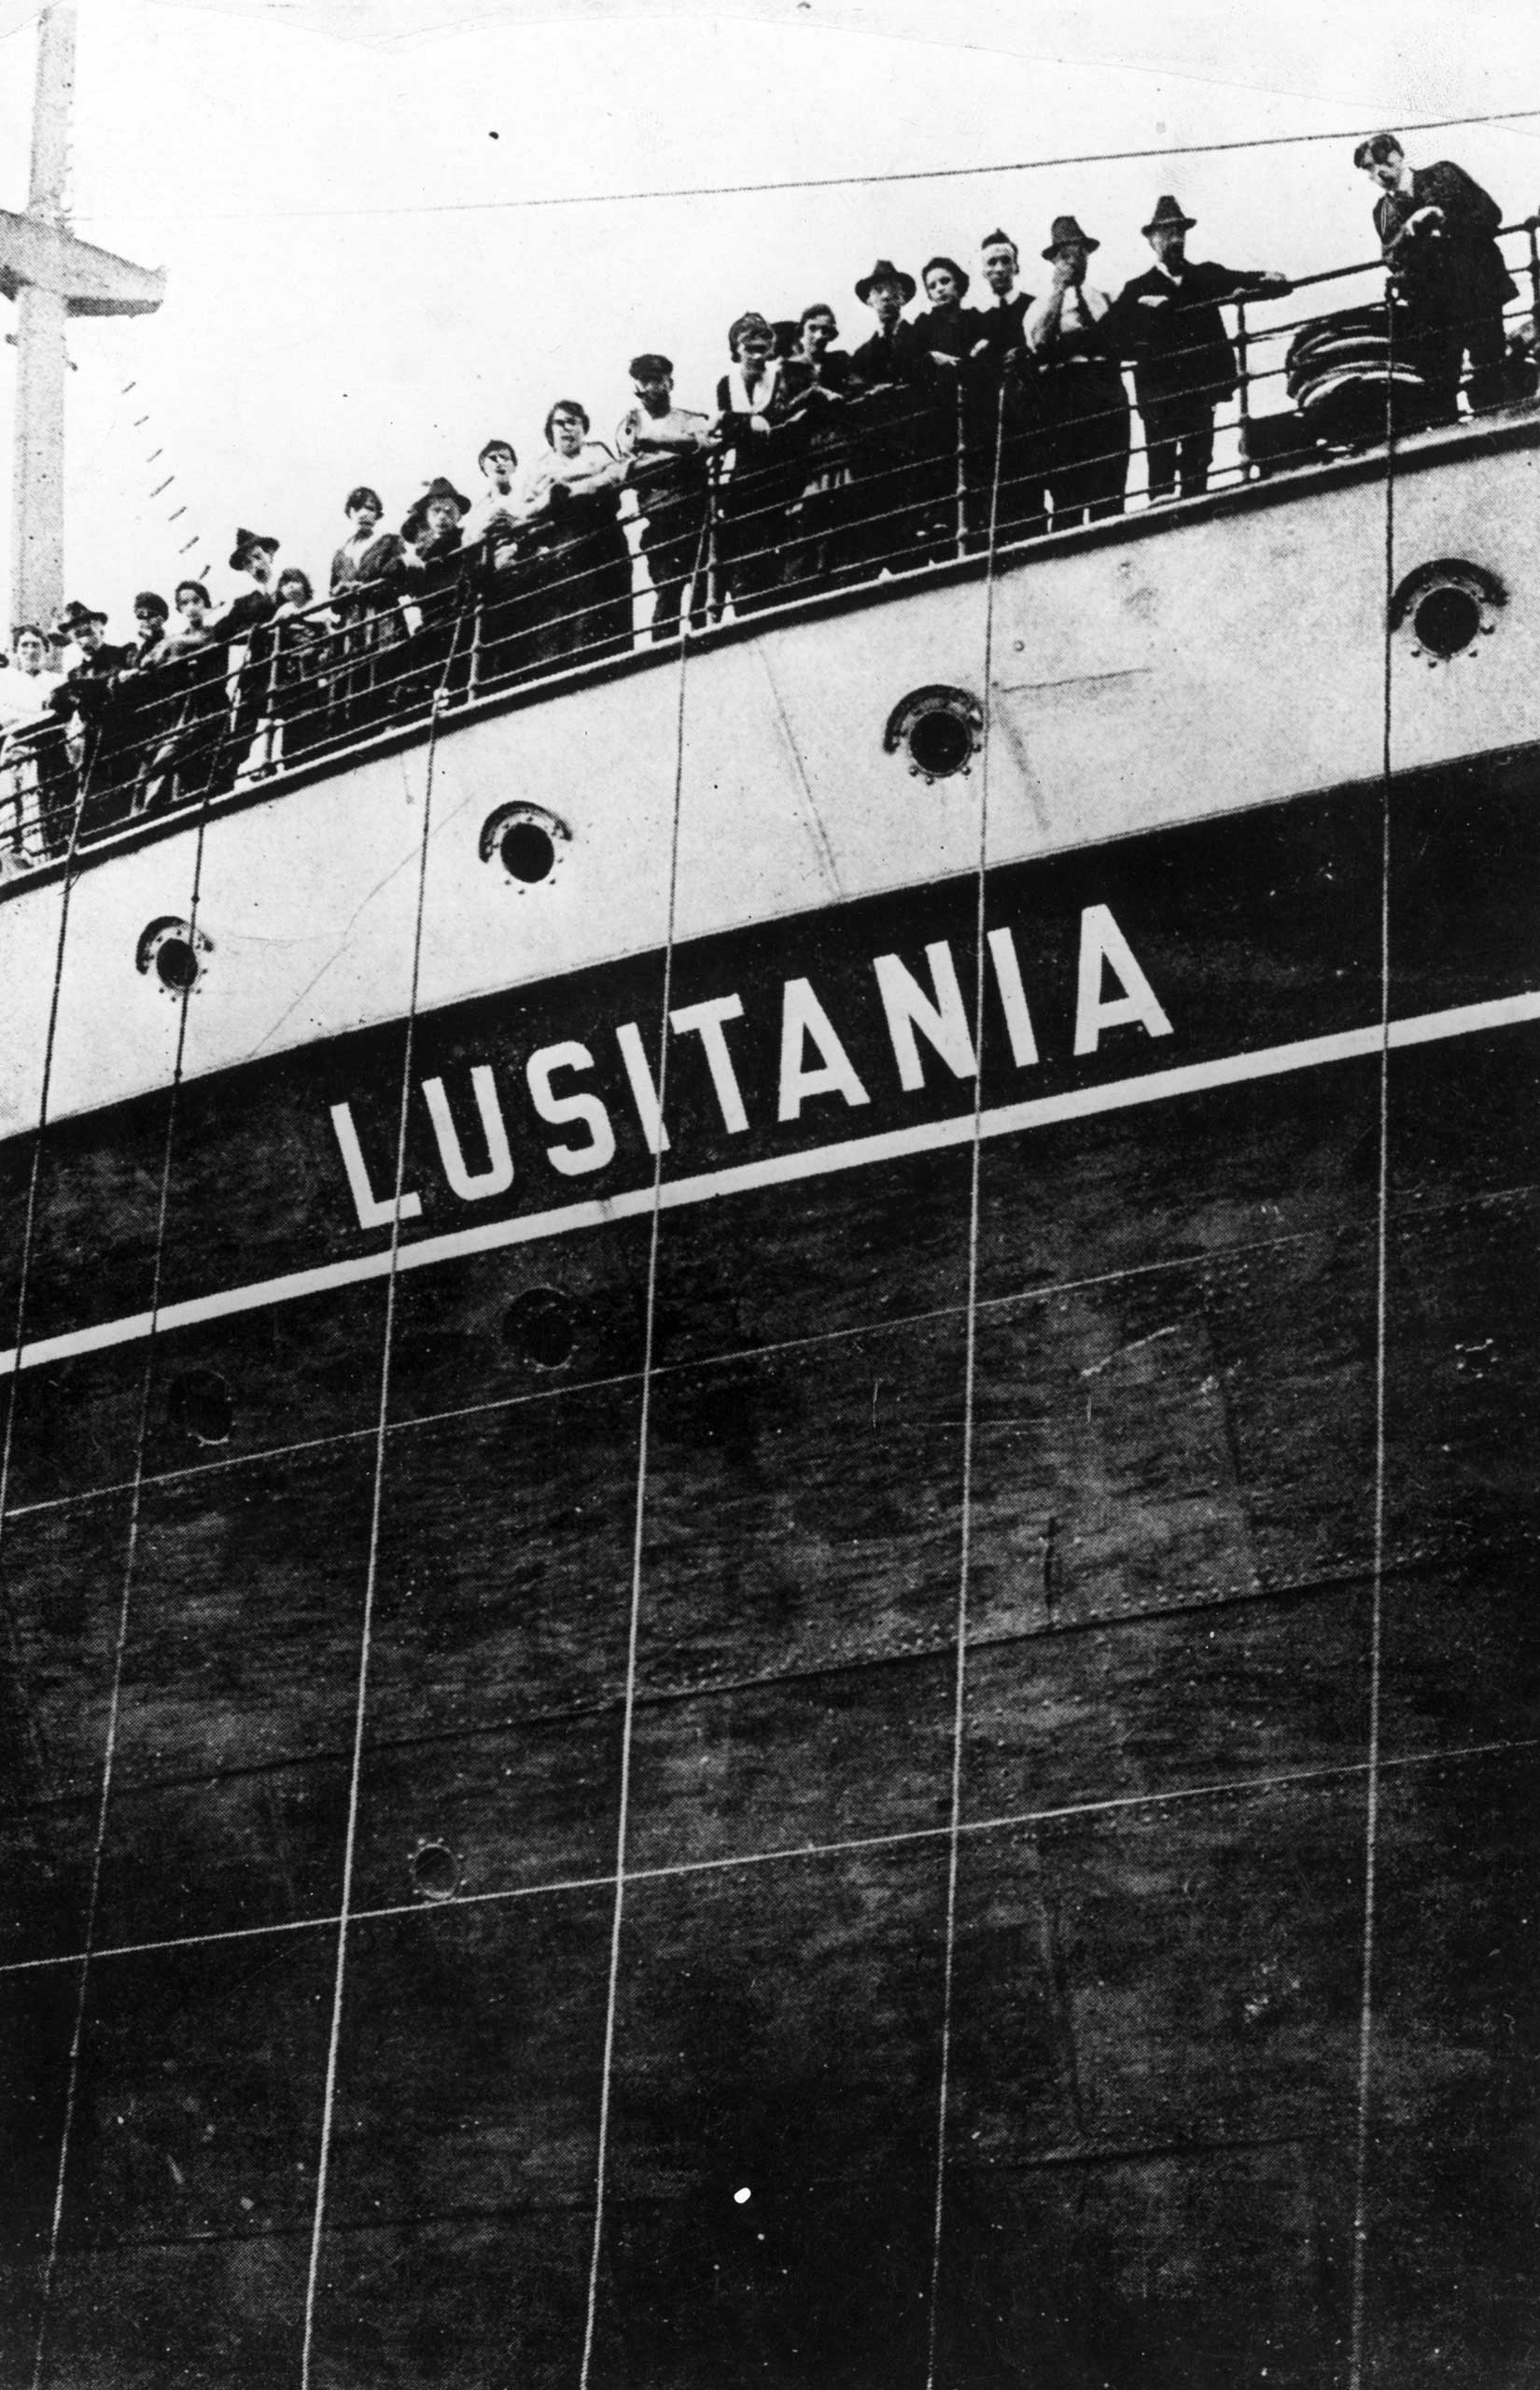 Extras line the deck of the huge set built to represent the ill-fated steamship 'Lusitania' for the silent film 'The Sinking of the Lusitania'. (Getty Images)